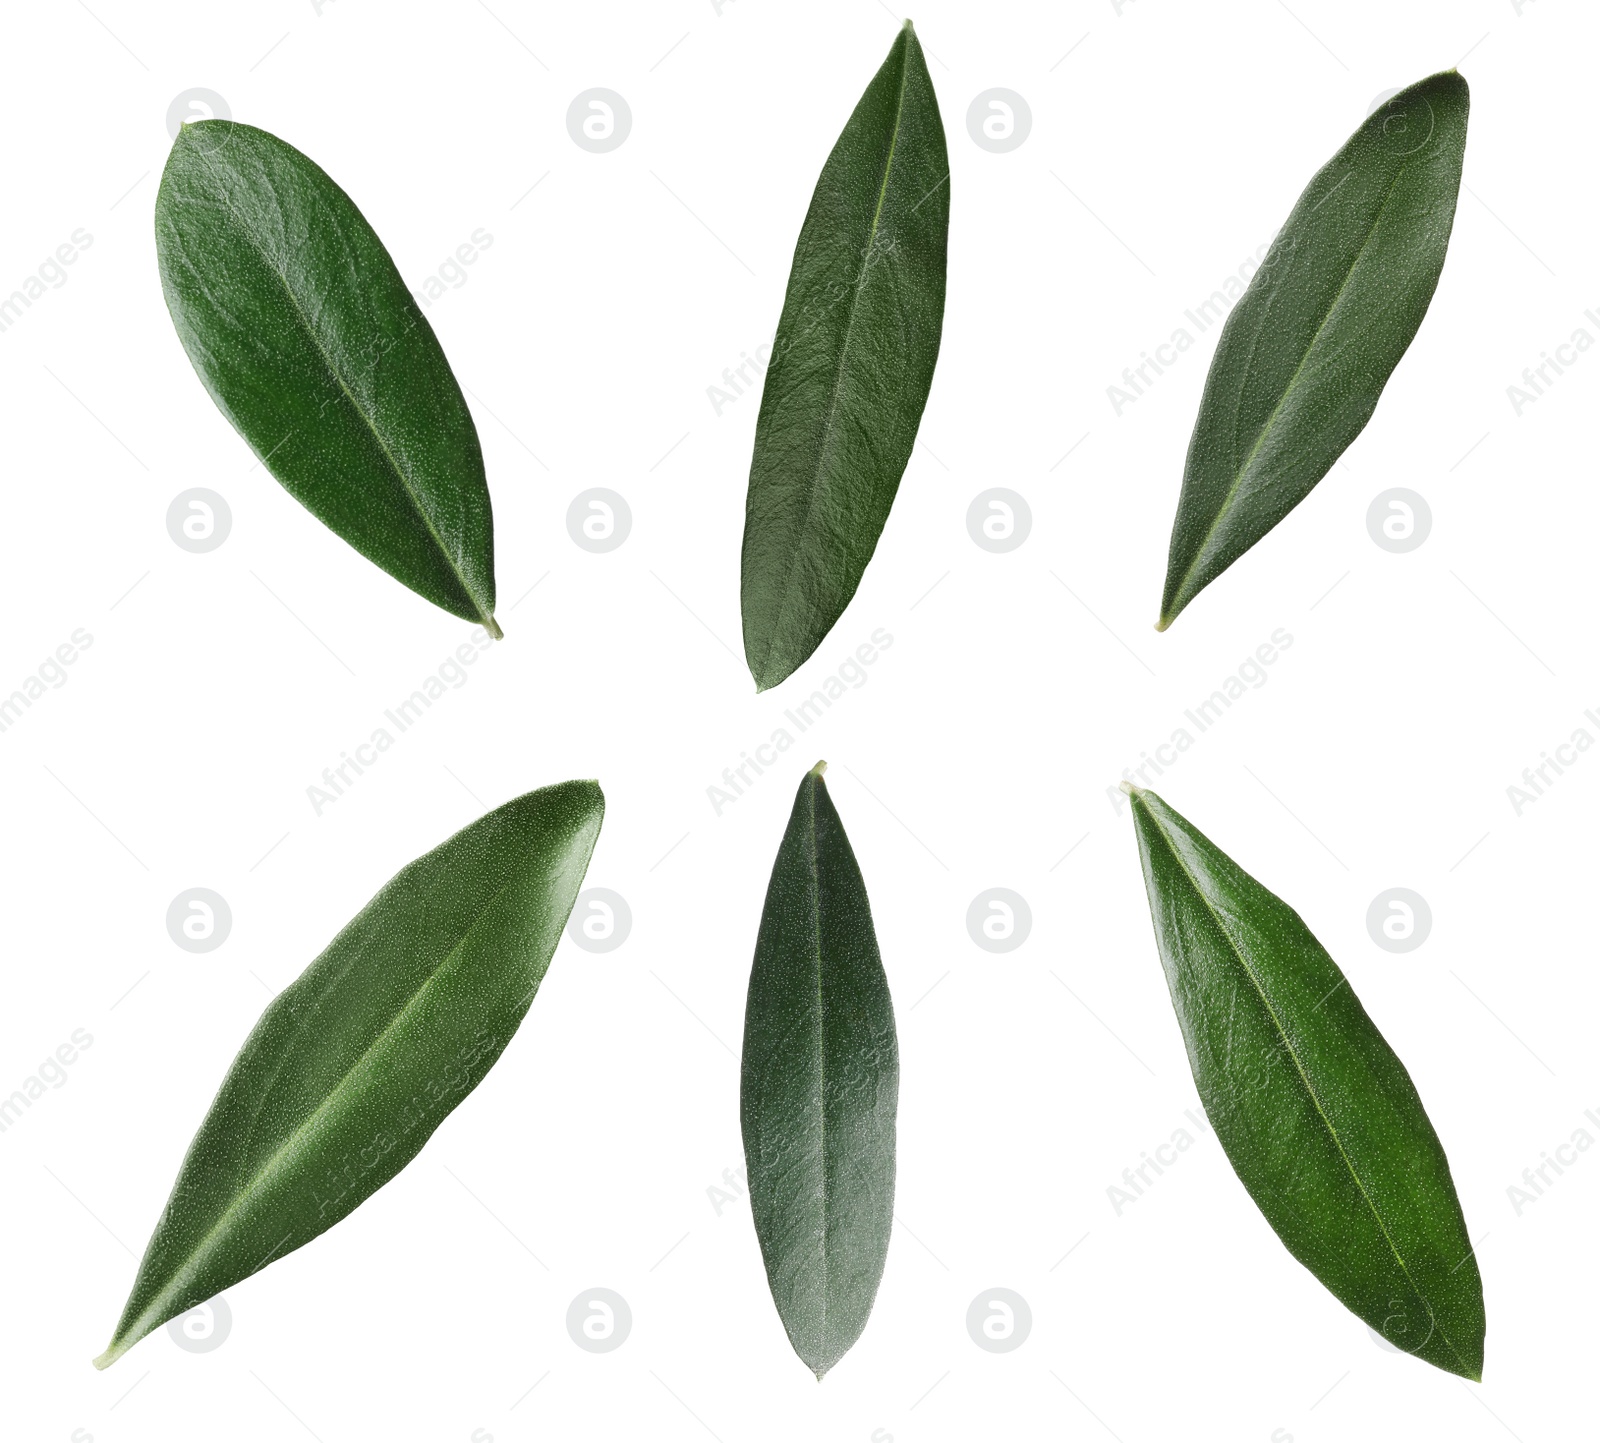 Image of Set with fresh green olive leaves on white background